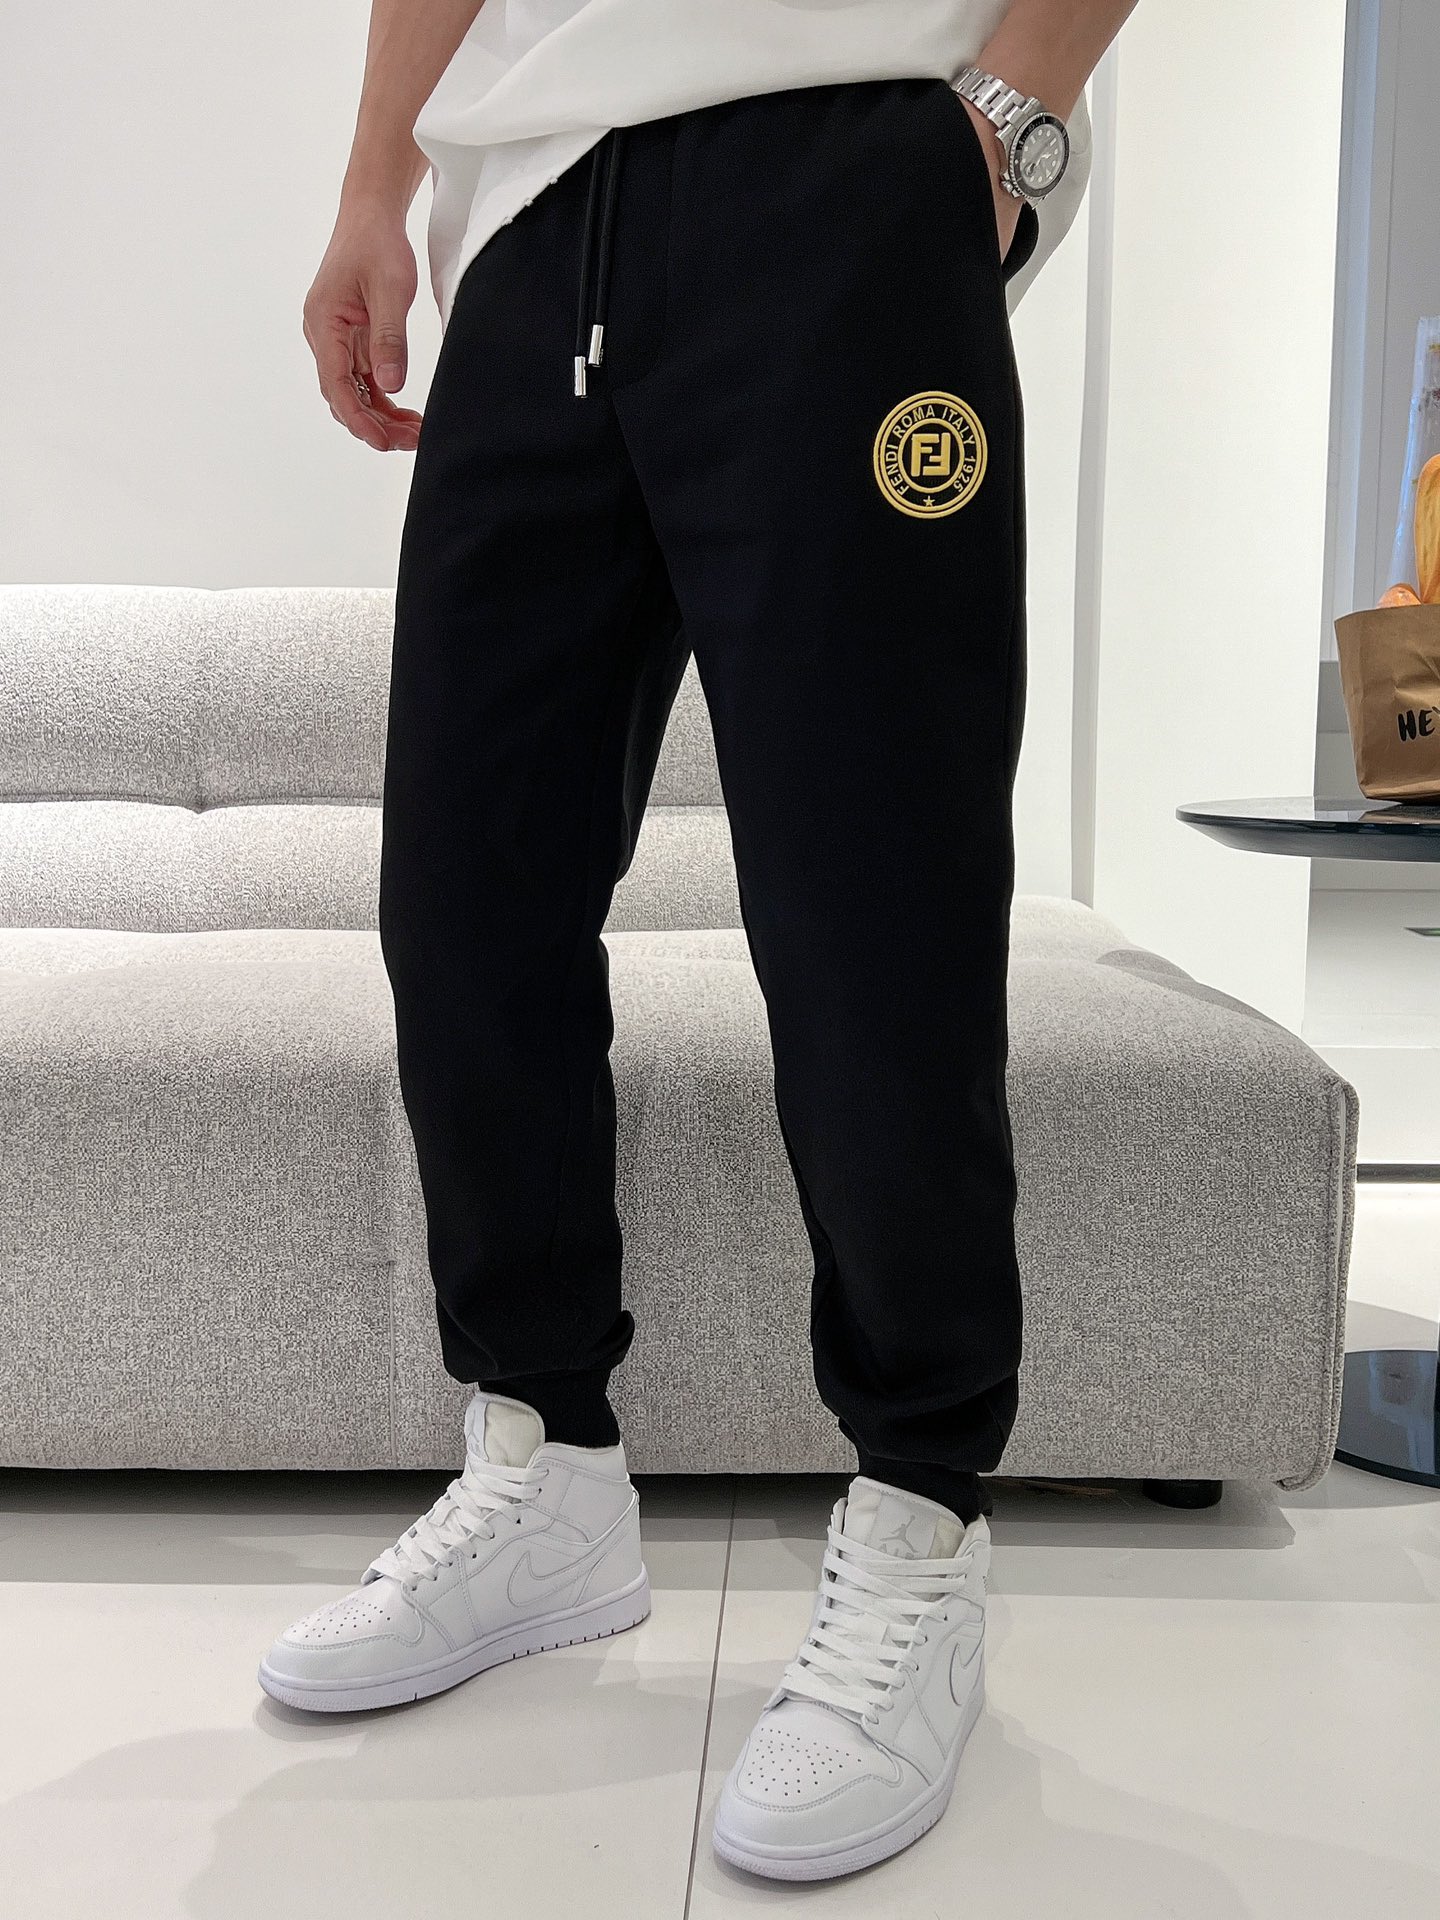 What 1:1 replica
 Fendi Clothing Pants & Trousers Black Men Spring/Summer Collection Casual